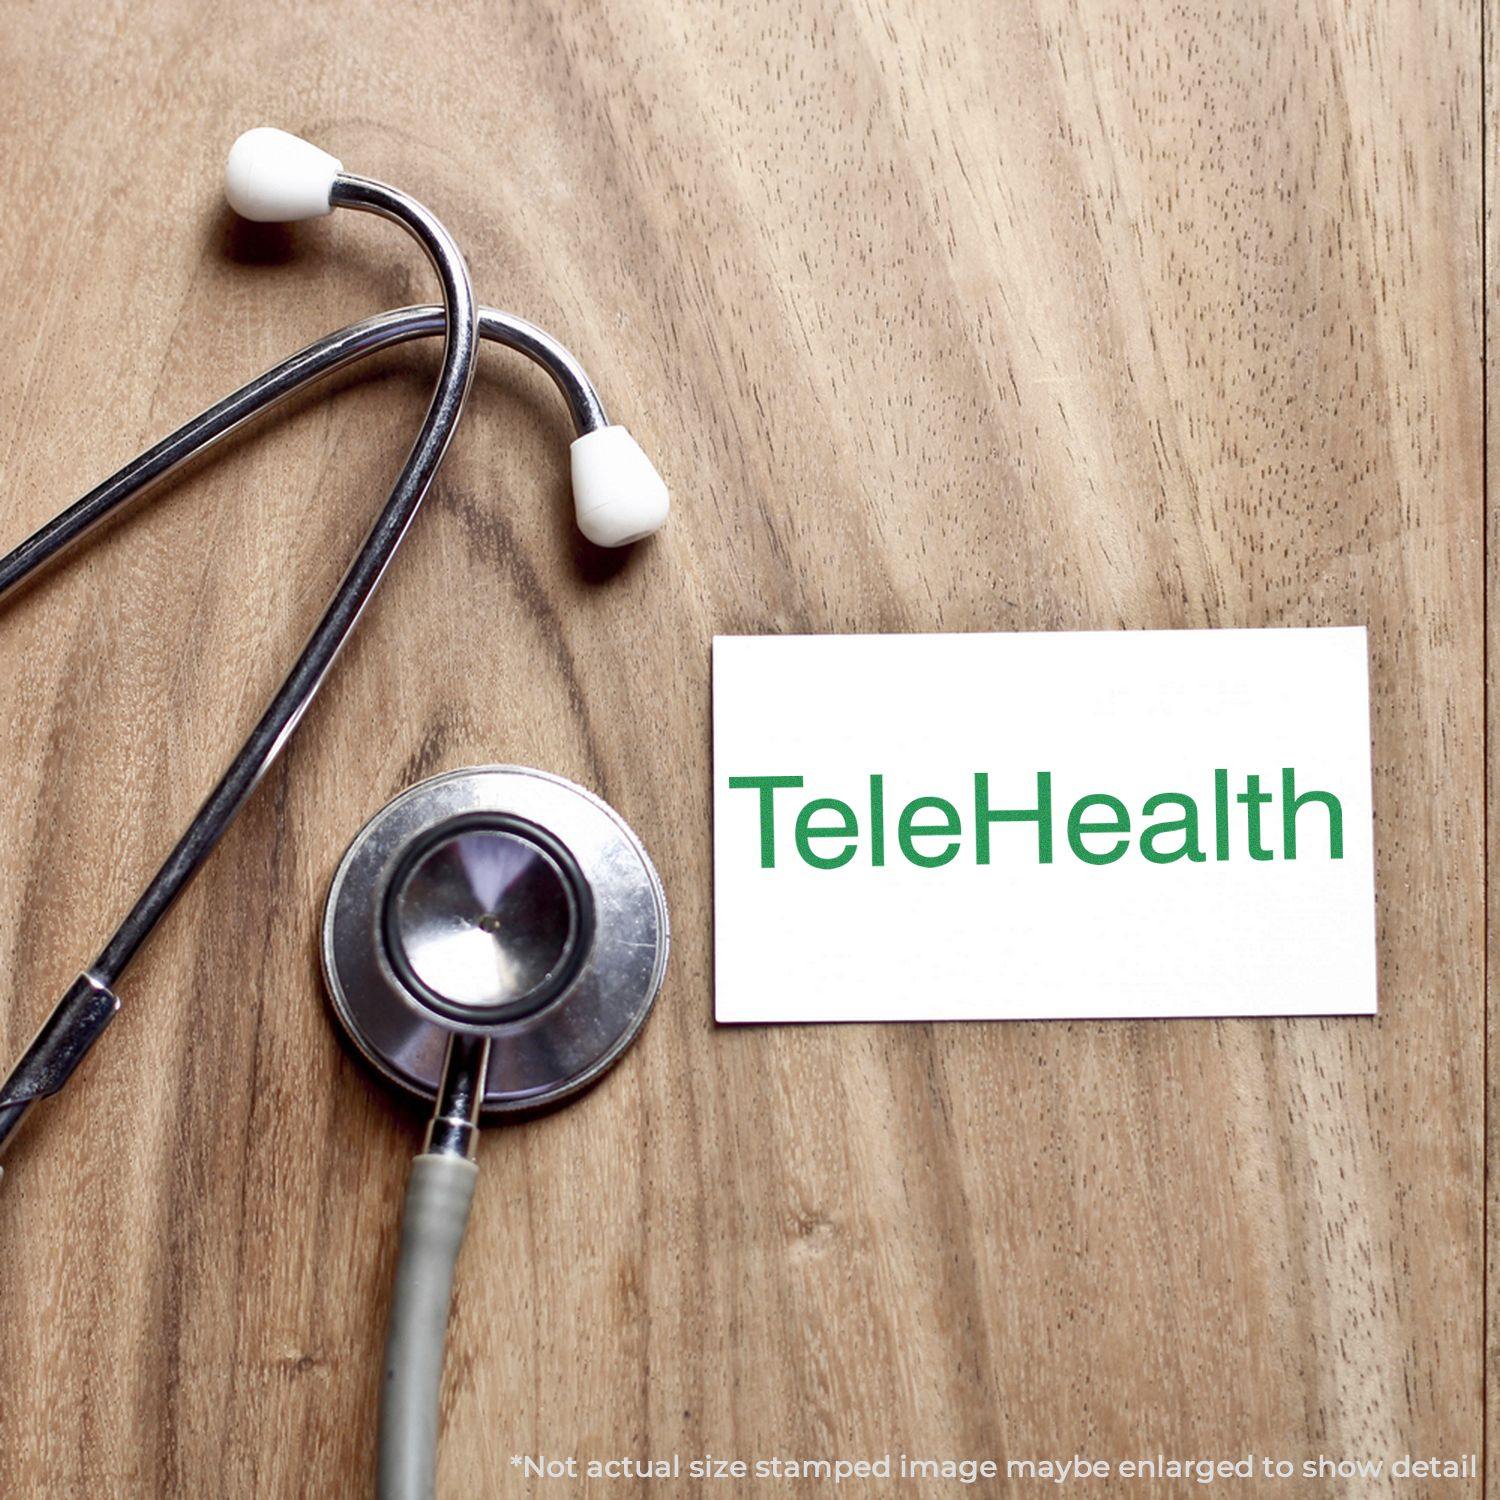 A self-inking stamp with a stamped image showing how the text "TeleHealth" in a large font is displayed by it after stamping.